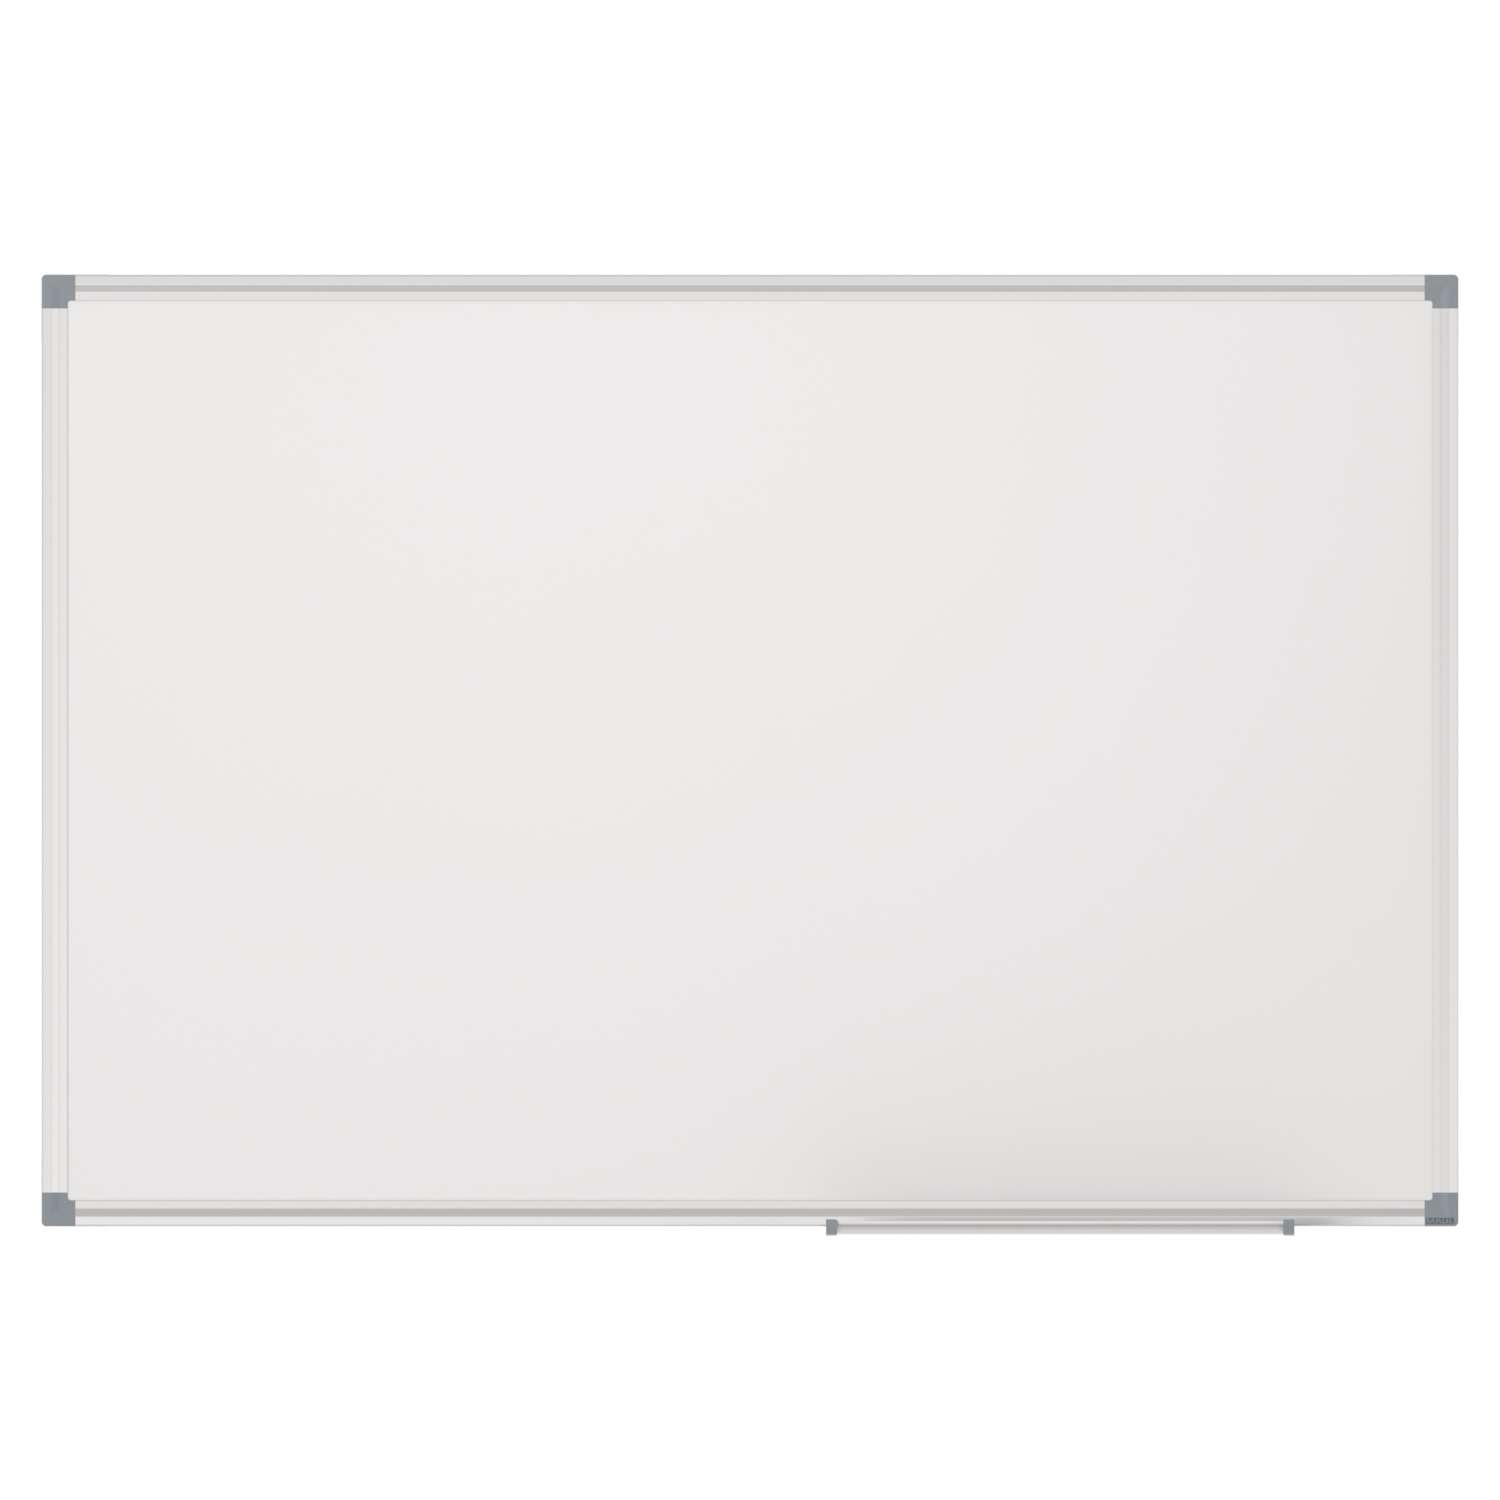 Whiteboard MAULstandard, Emaille, 90x180 cm